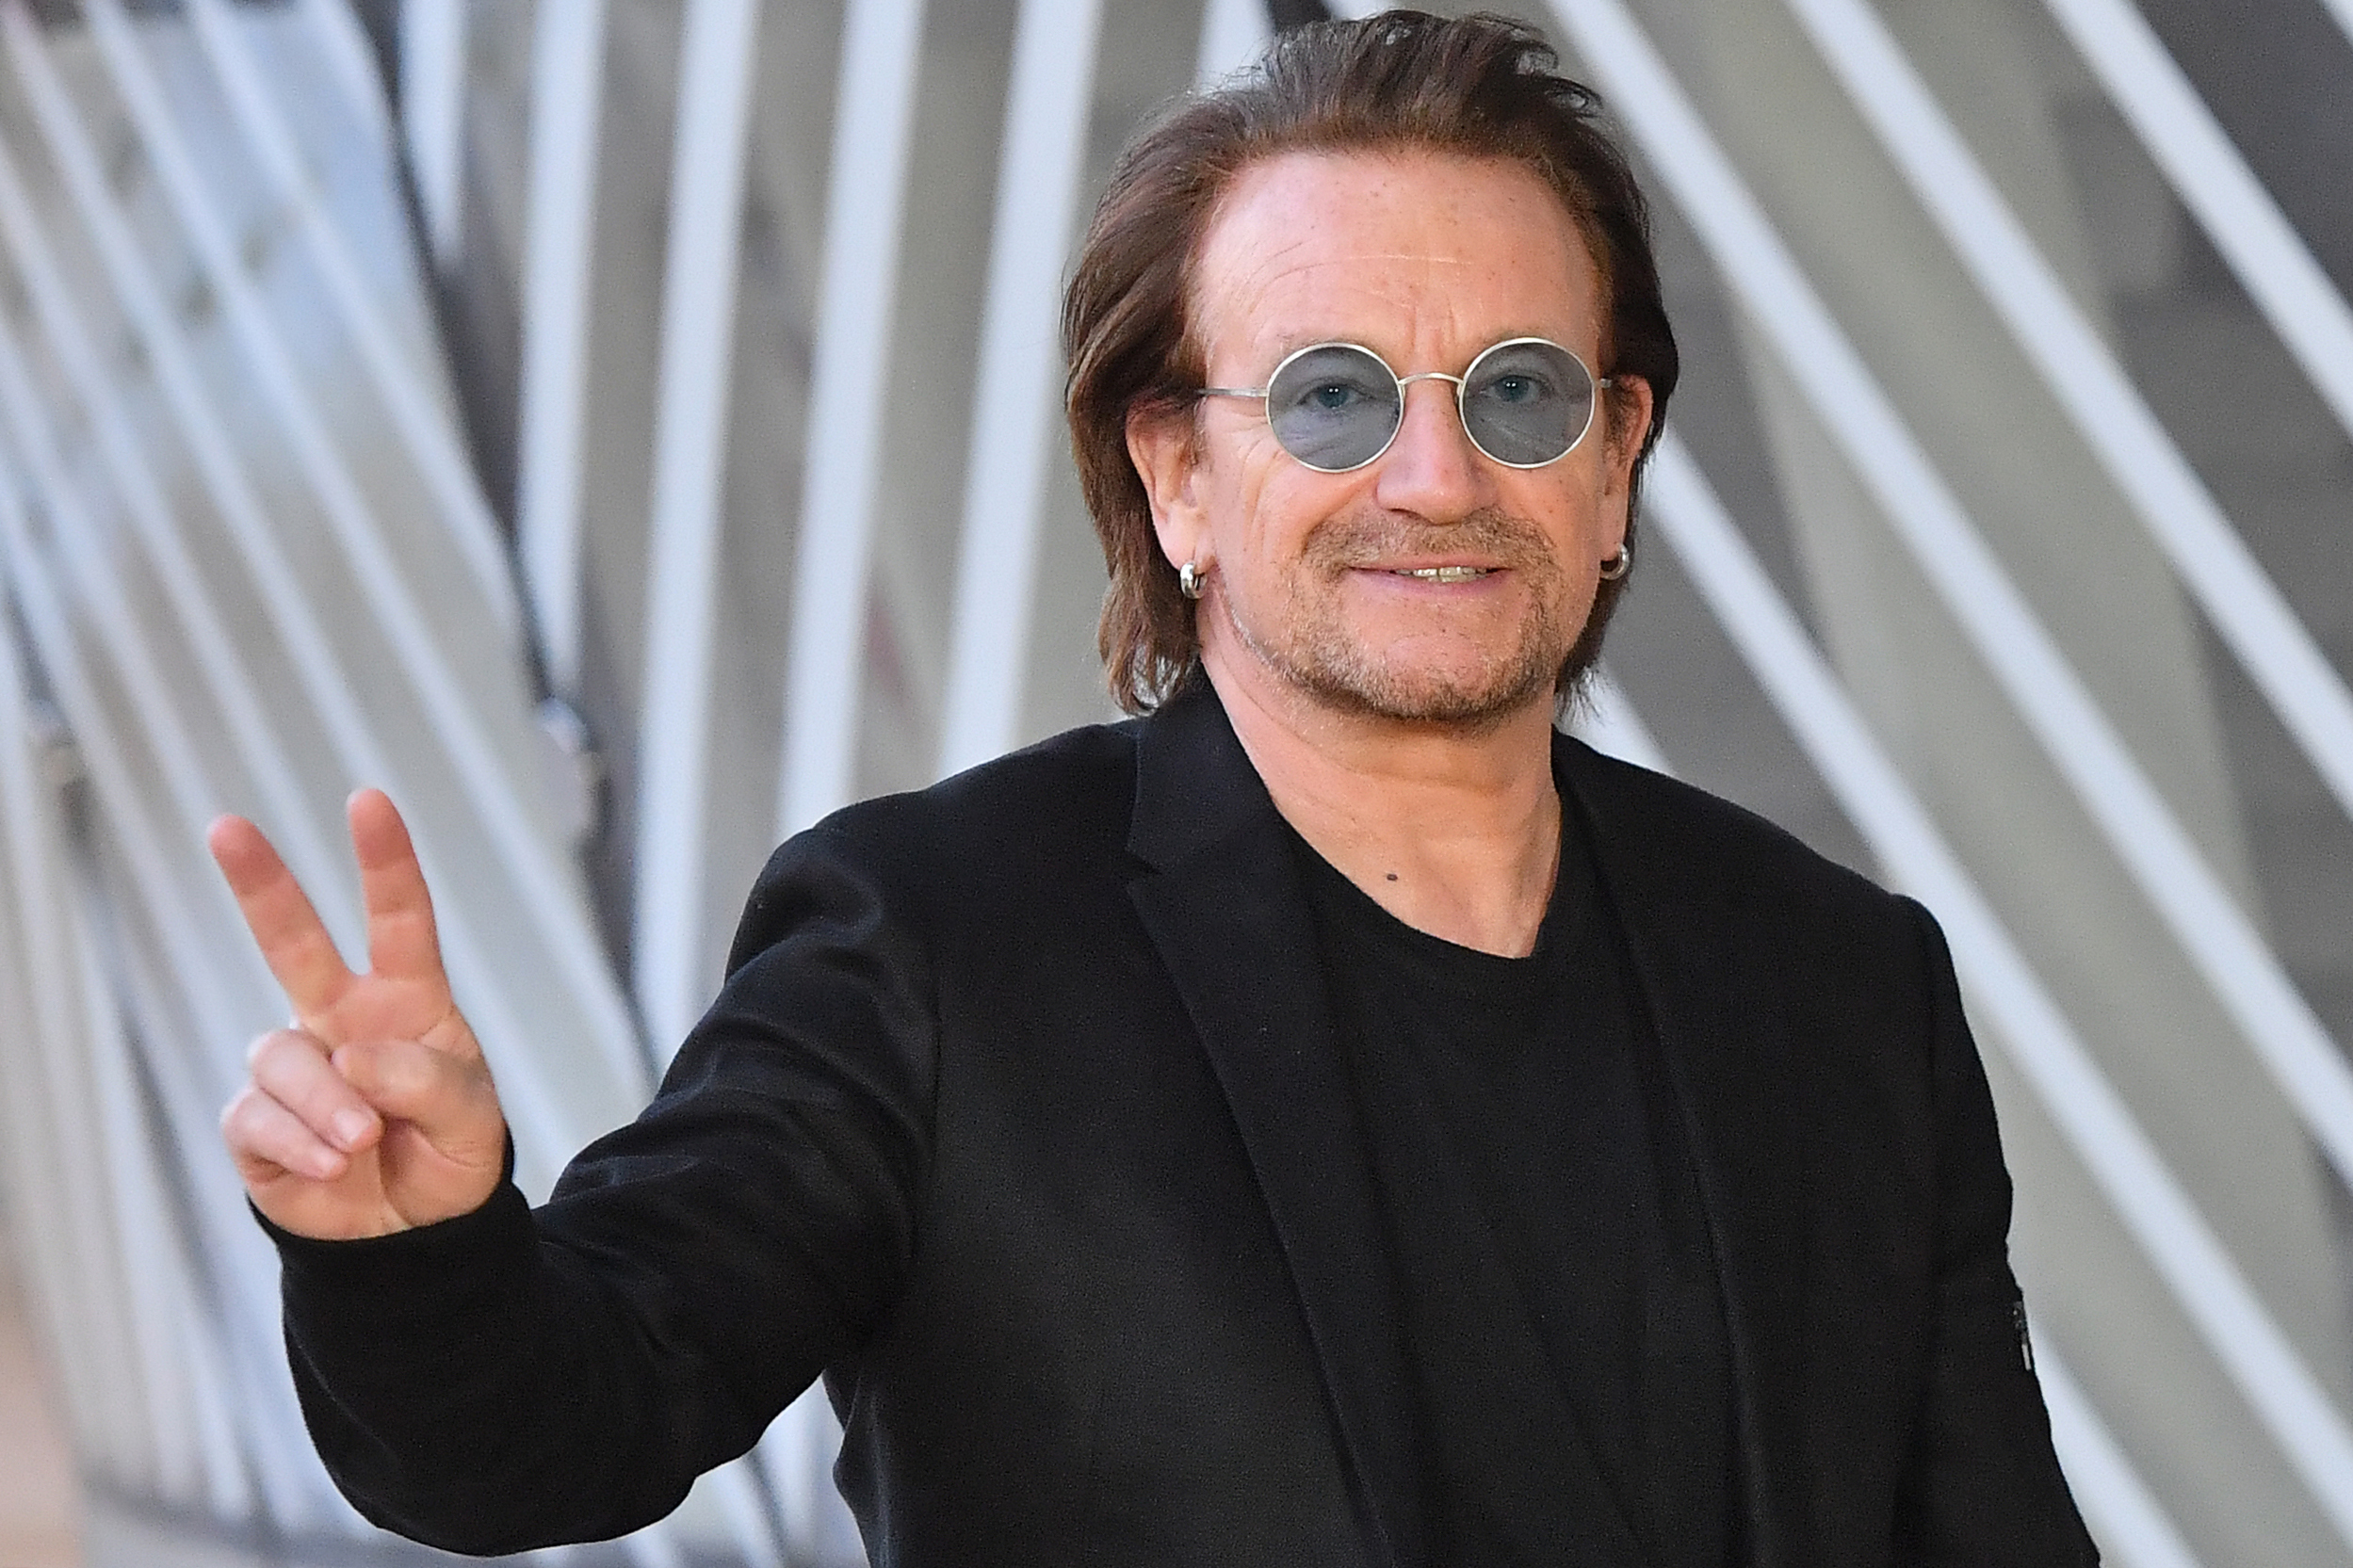 Bono flashes the Victory sign upon his arrival